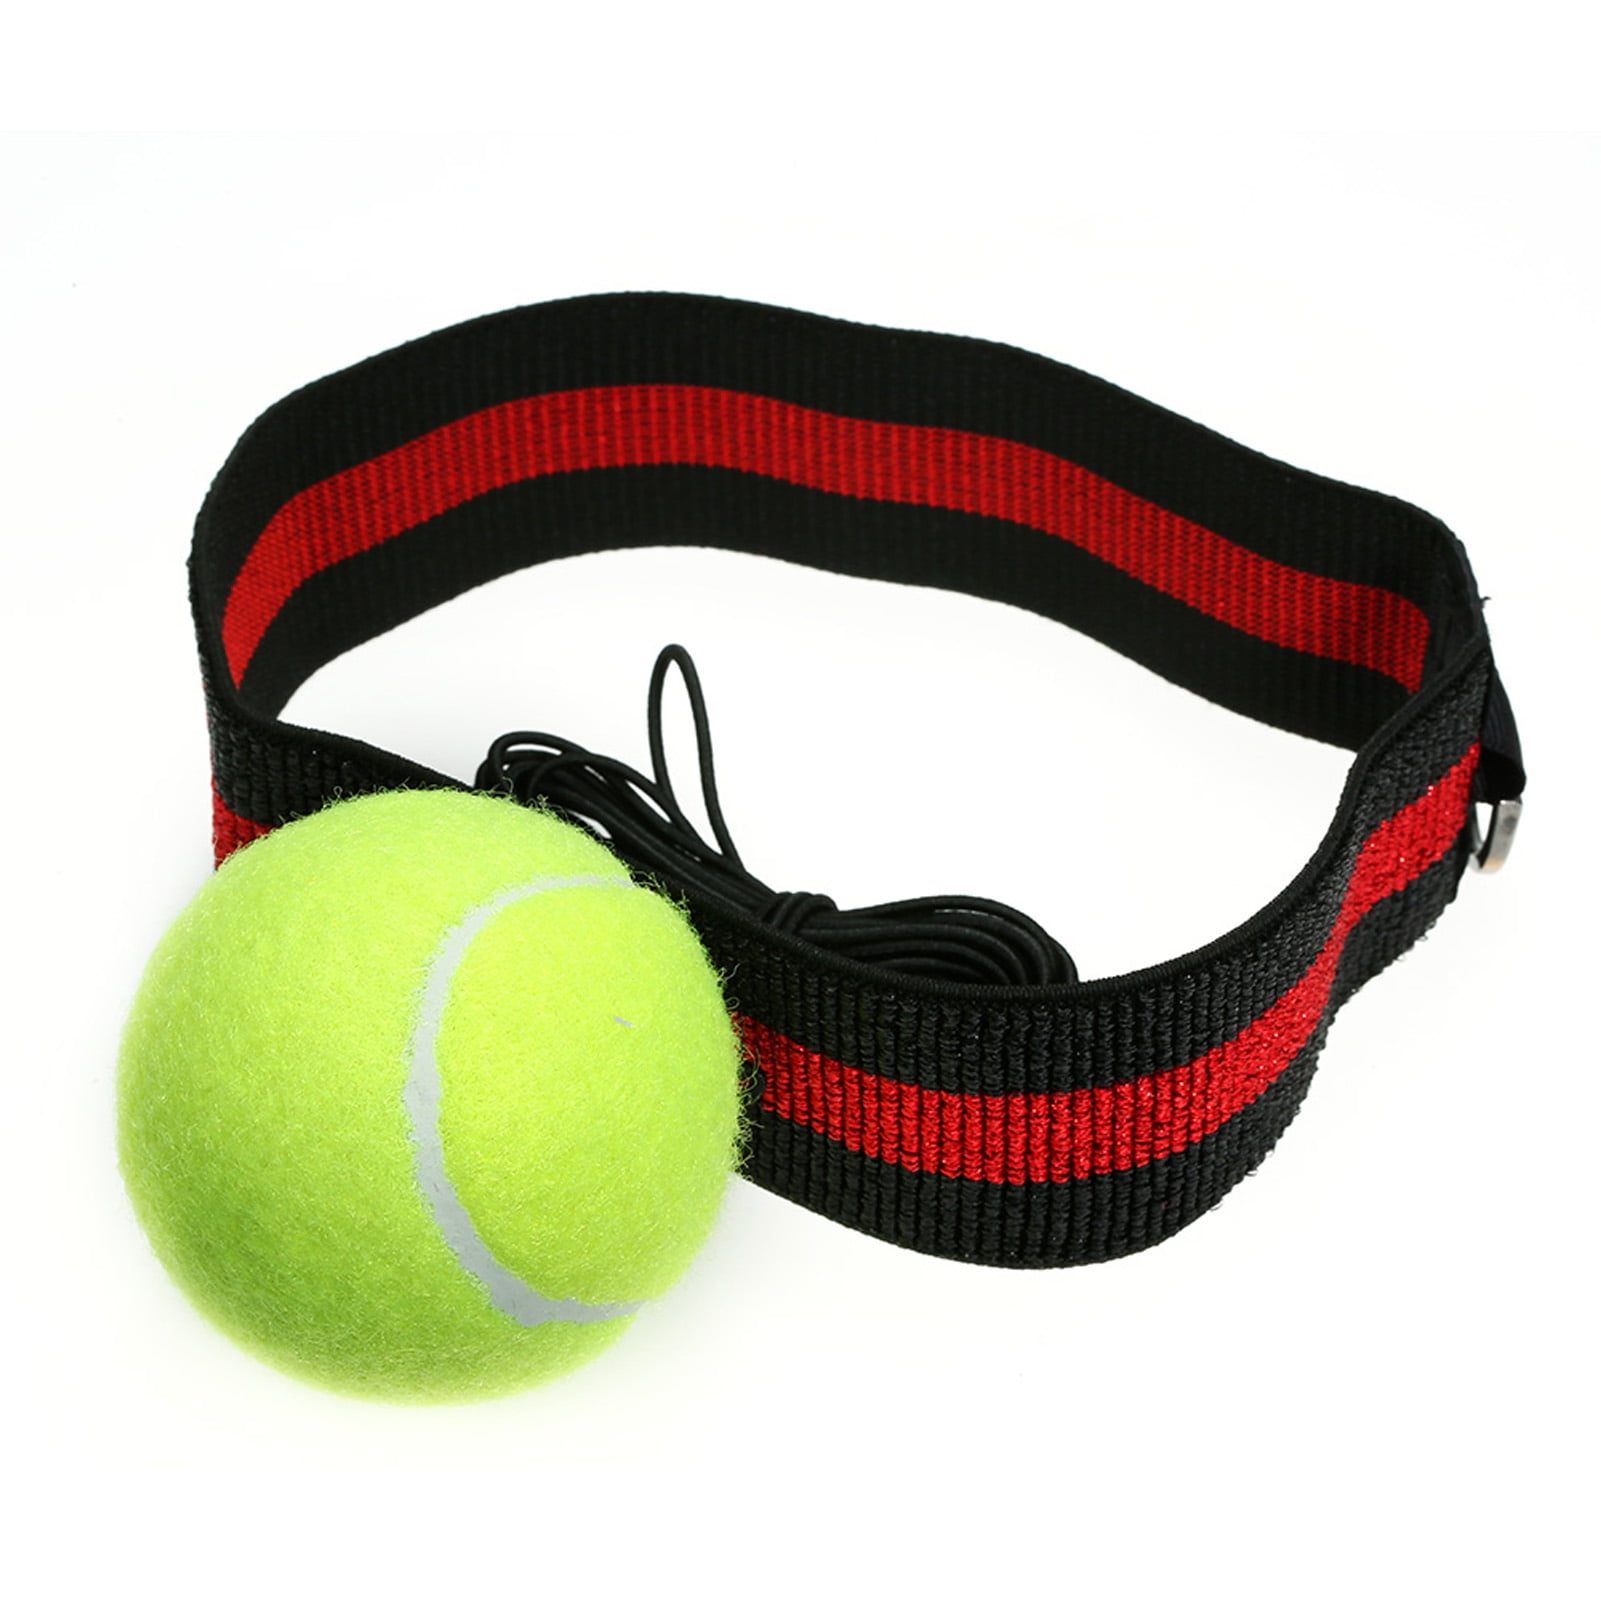 Details about   Boxing Punch Exercise Fight Ball With HeadBand For Reflex Speed Training Fitness 